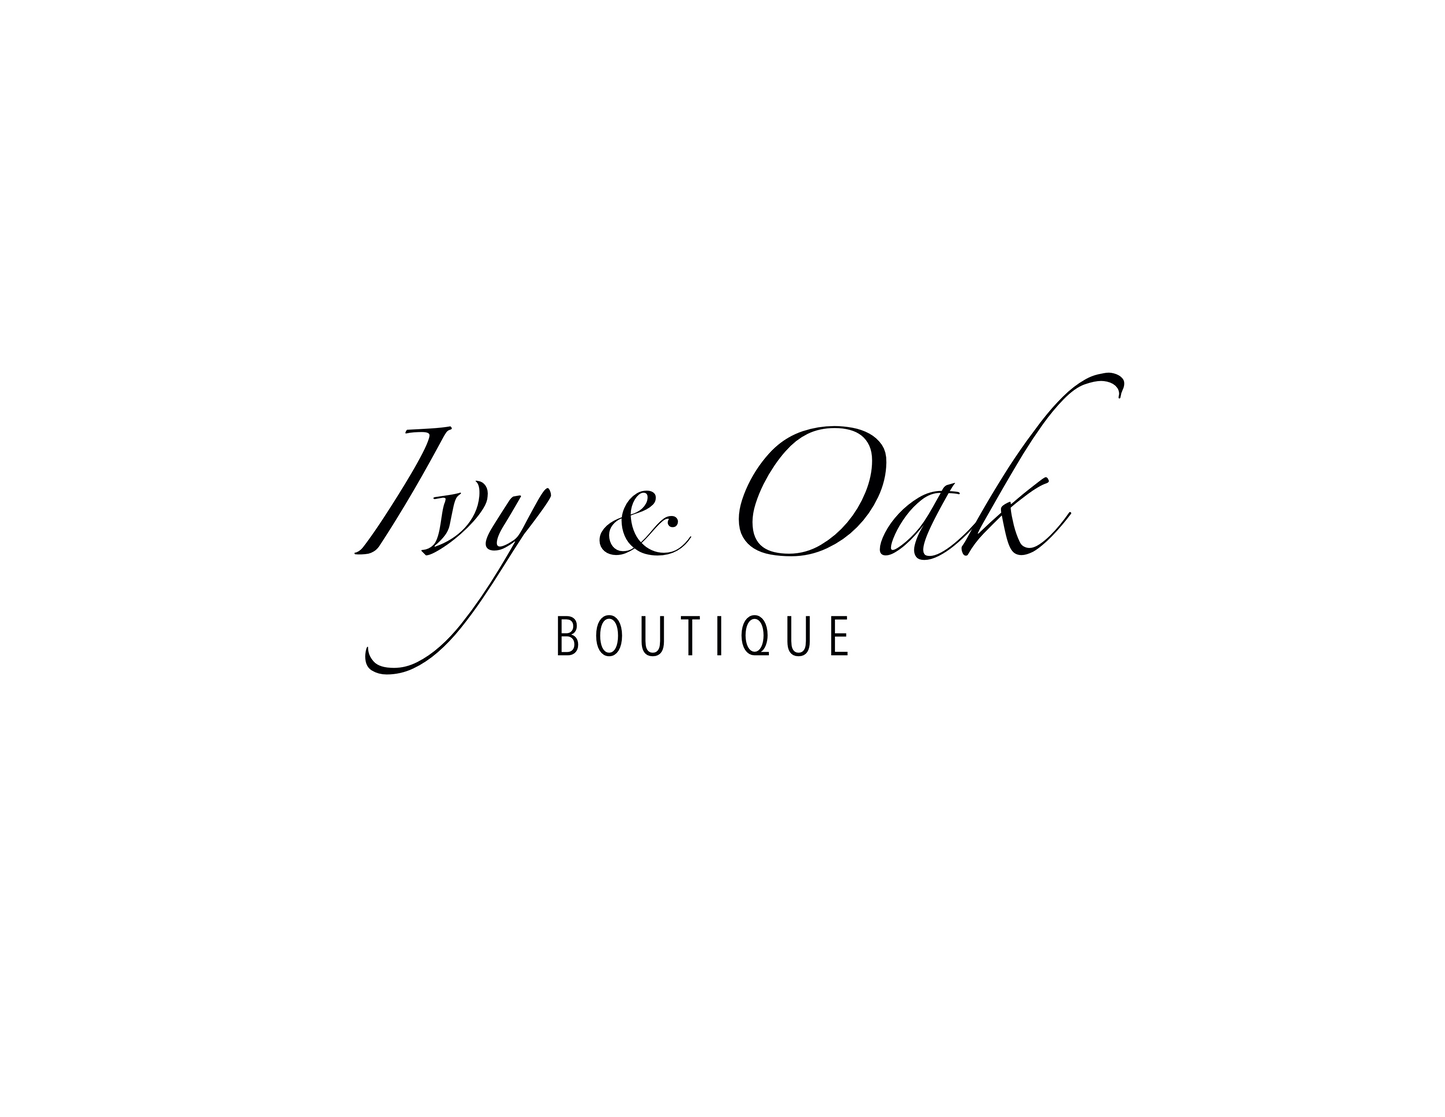 Ivy & Oak Boutique Giftcard